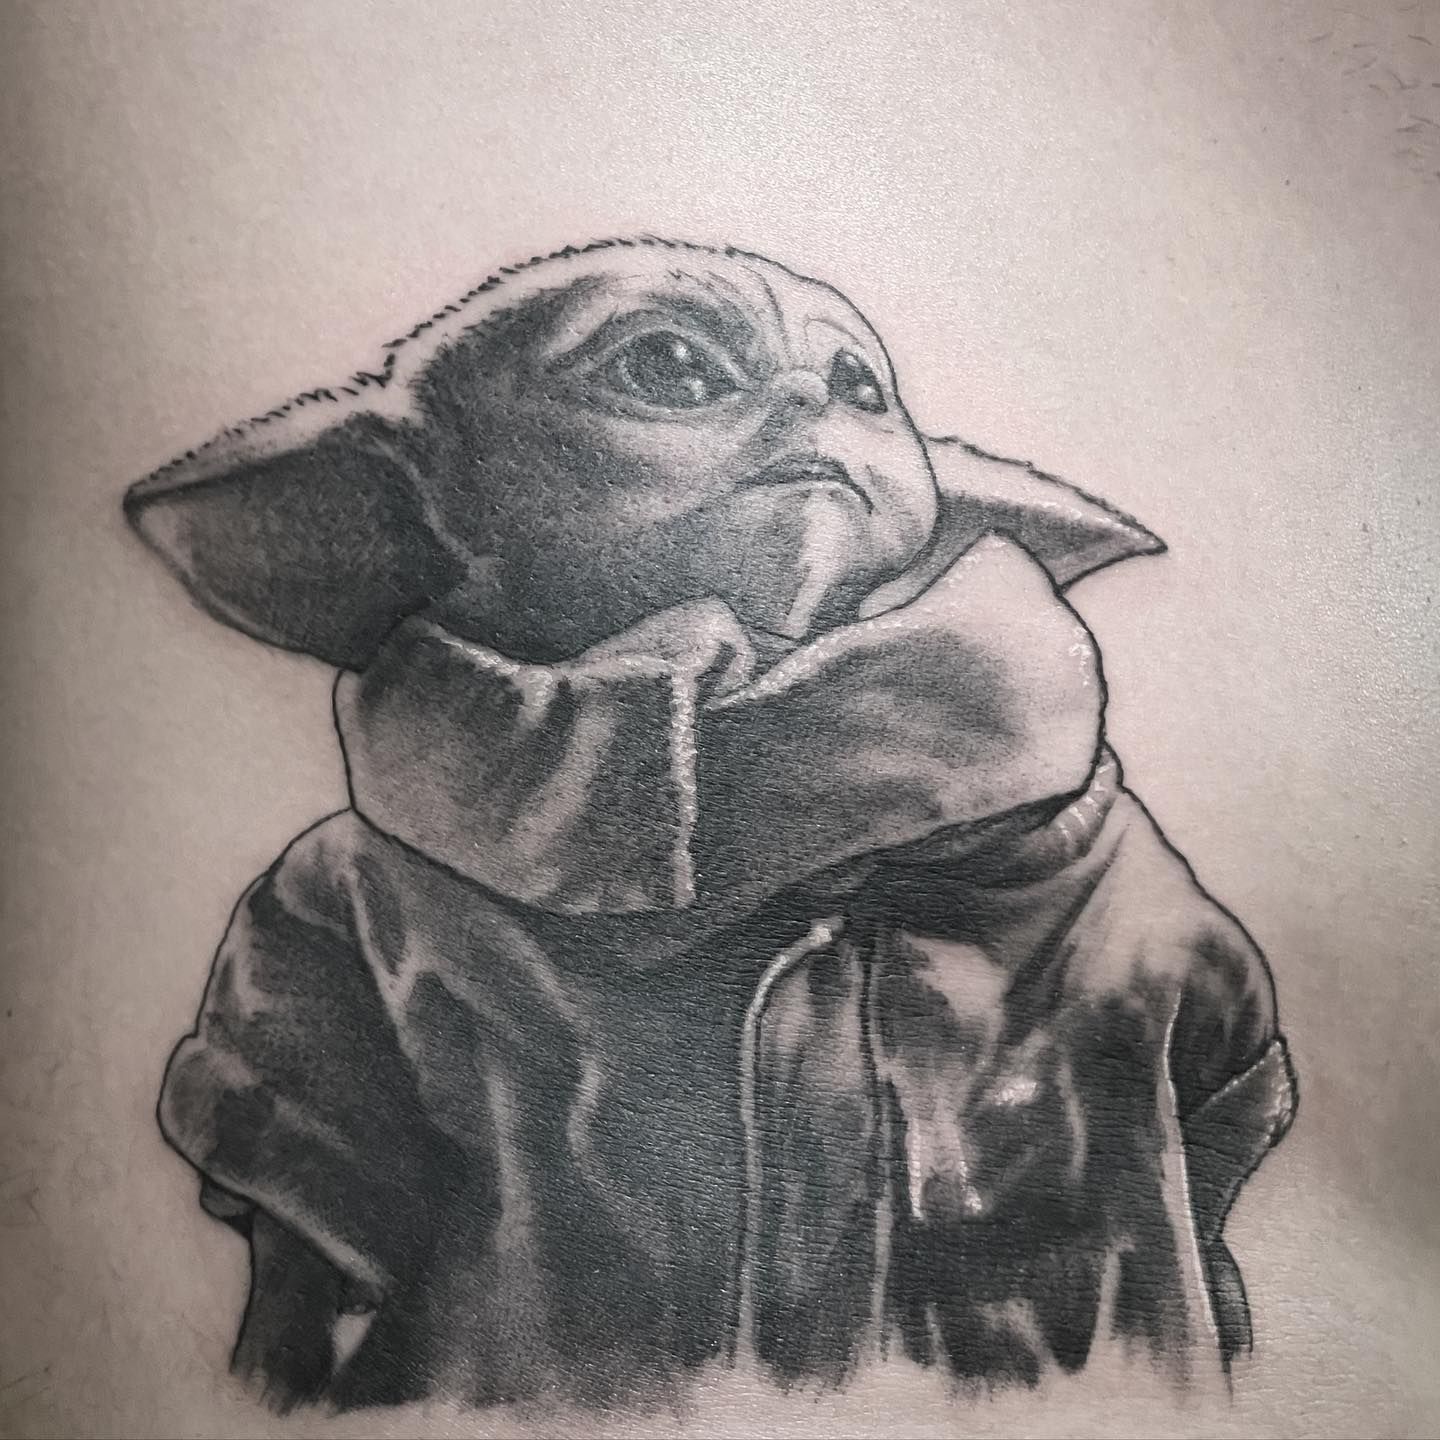 How to Draw a Traditional Tattoo Flash Art Design BABY YODA - The